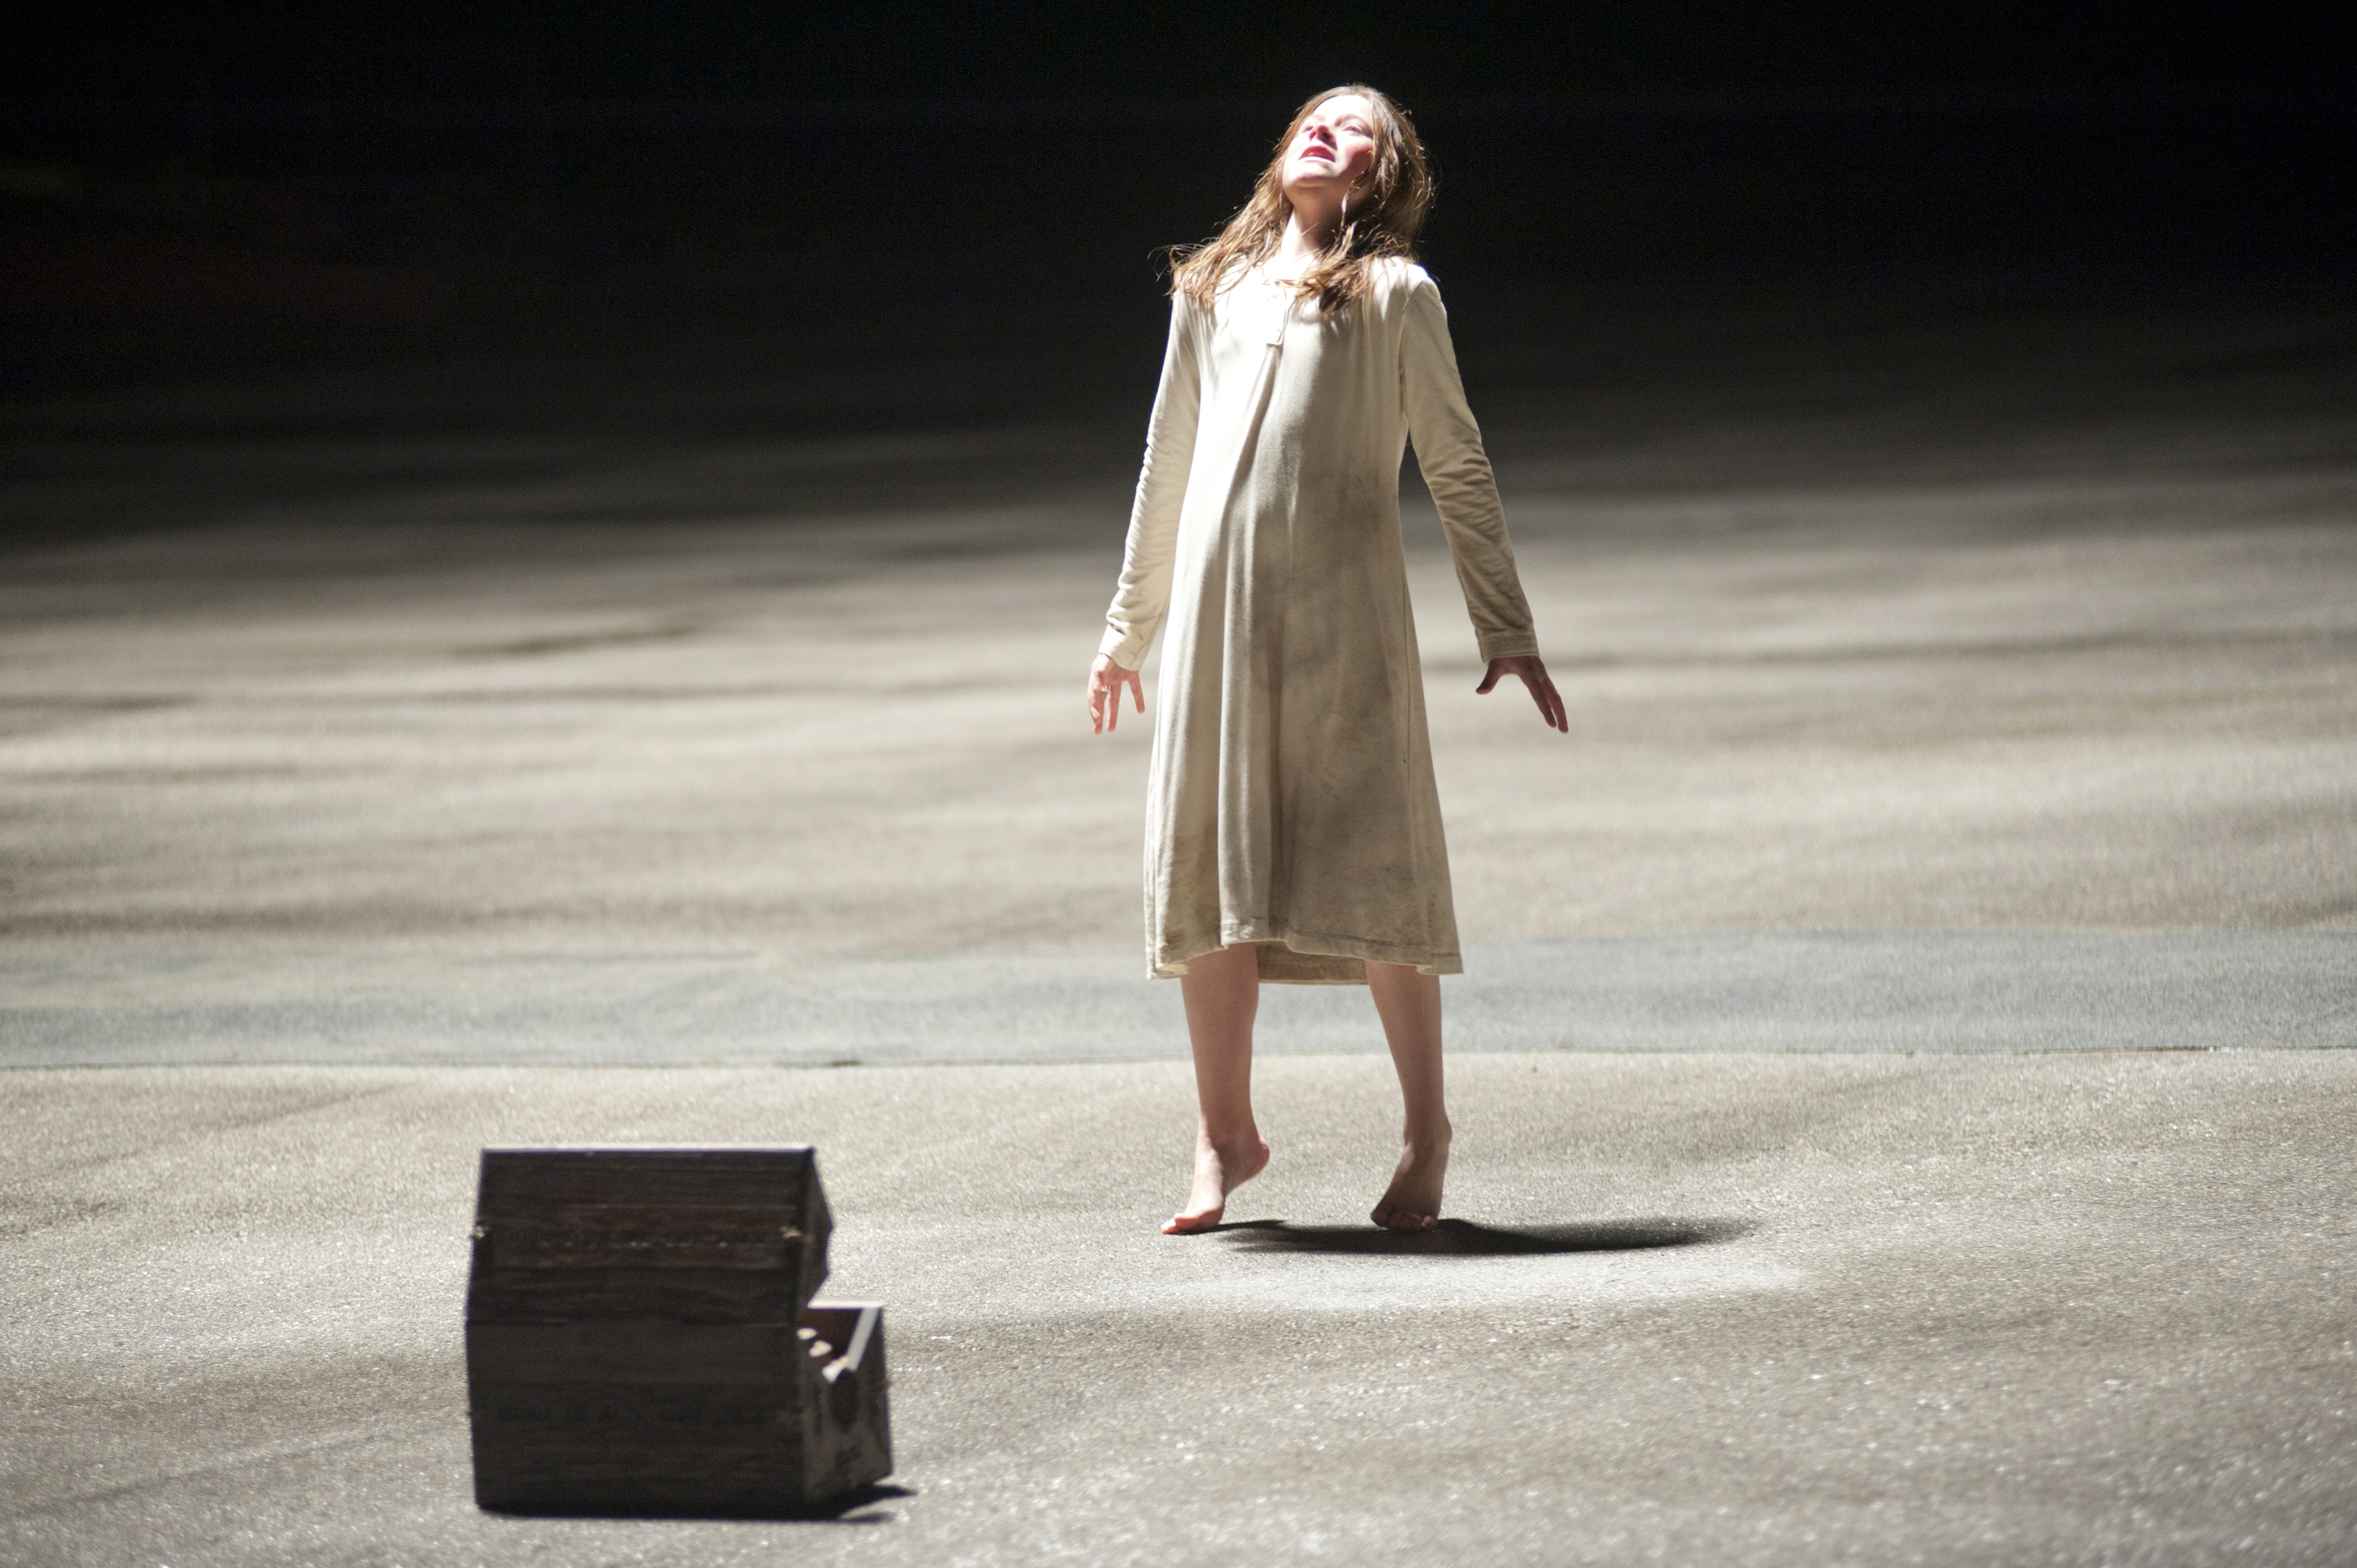 Natasha Calis as Emily in The Possession standing in an empty parking lot with a box in front of her as she is possessed by a dybbuk